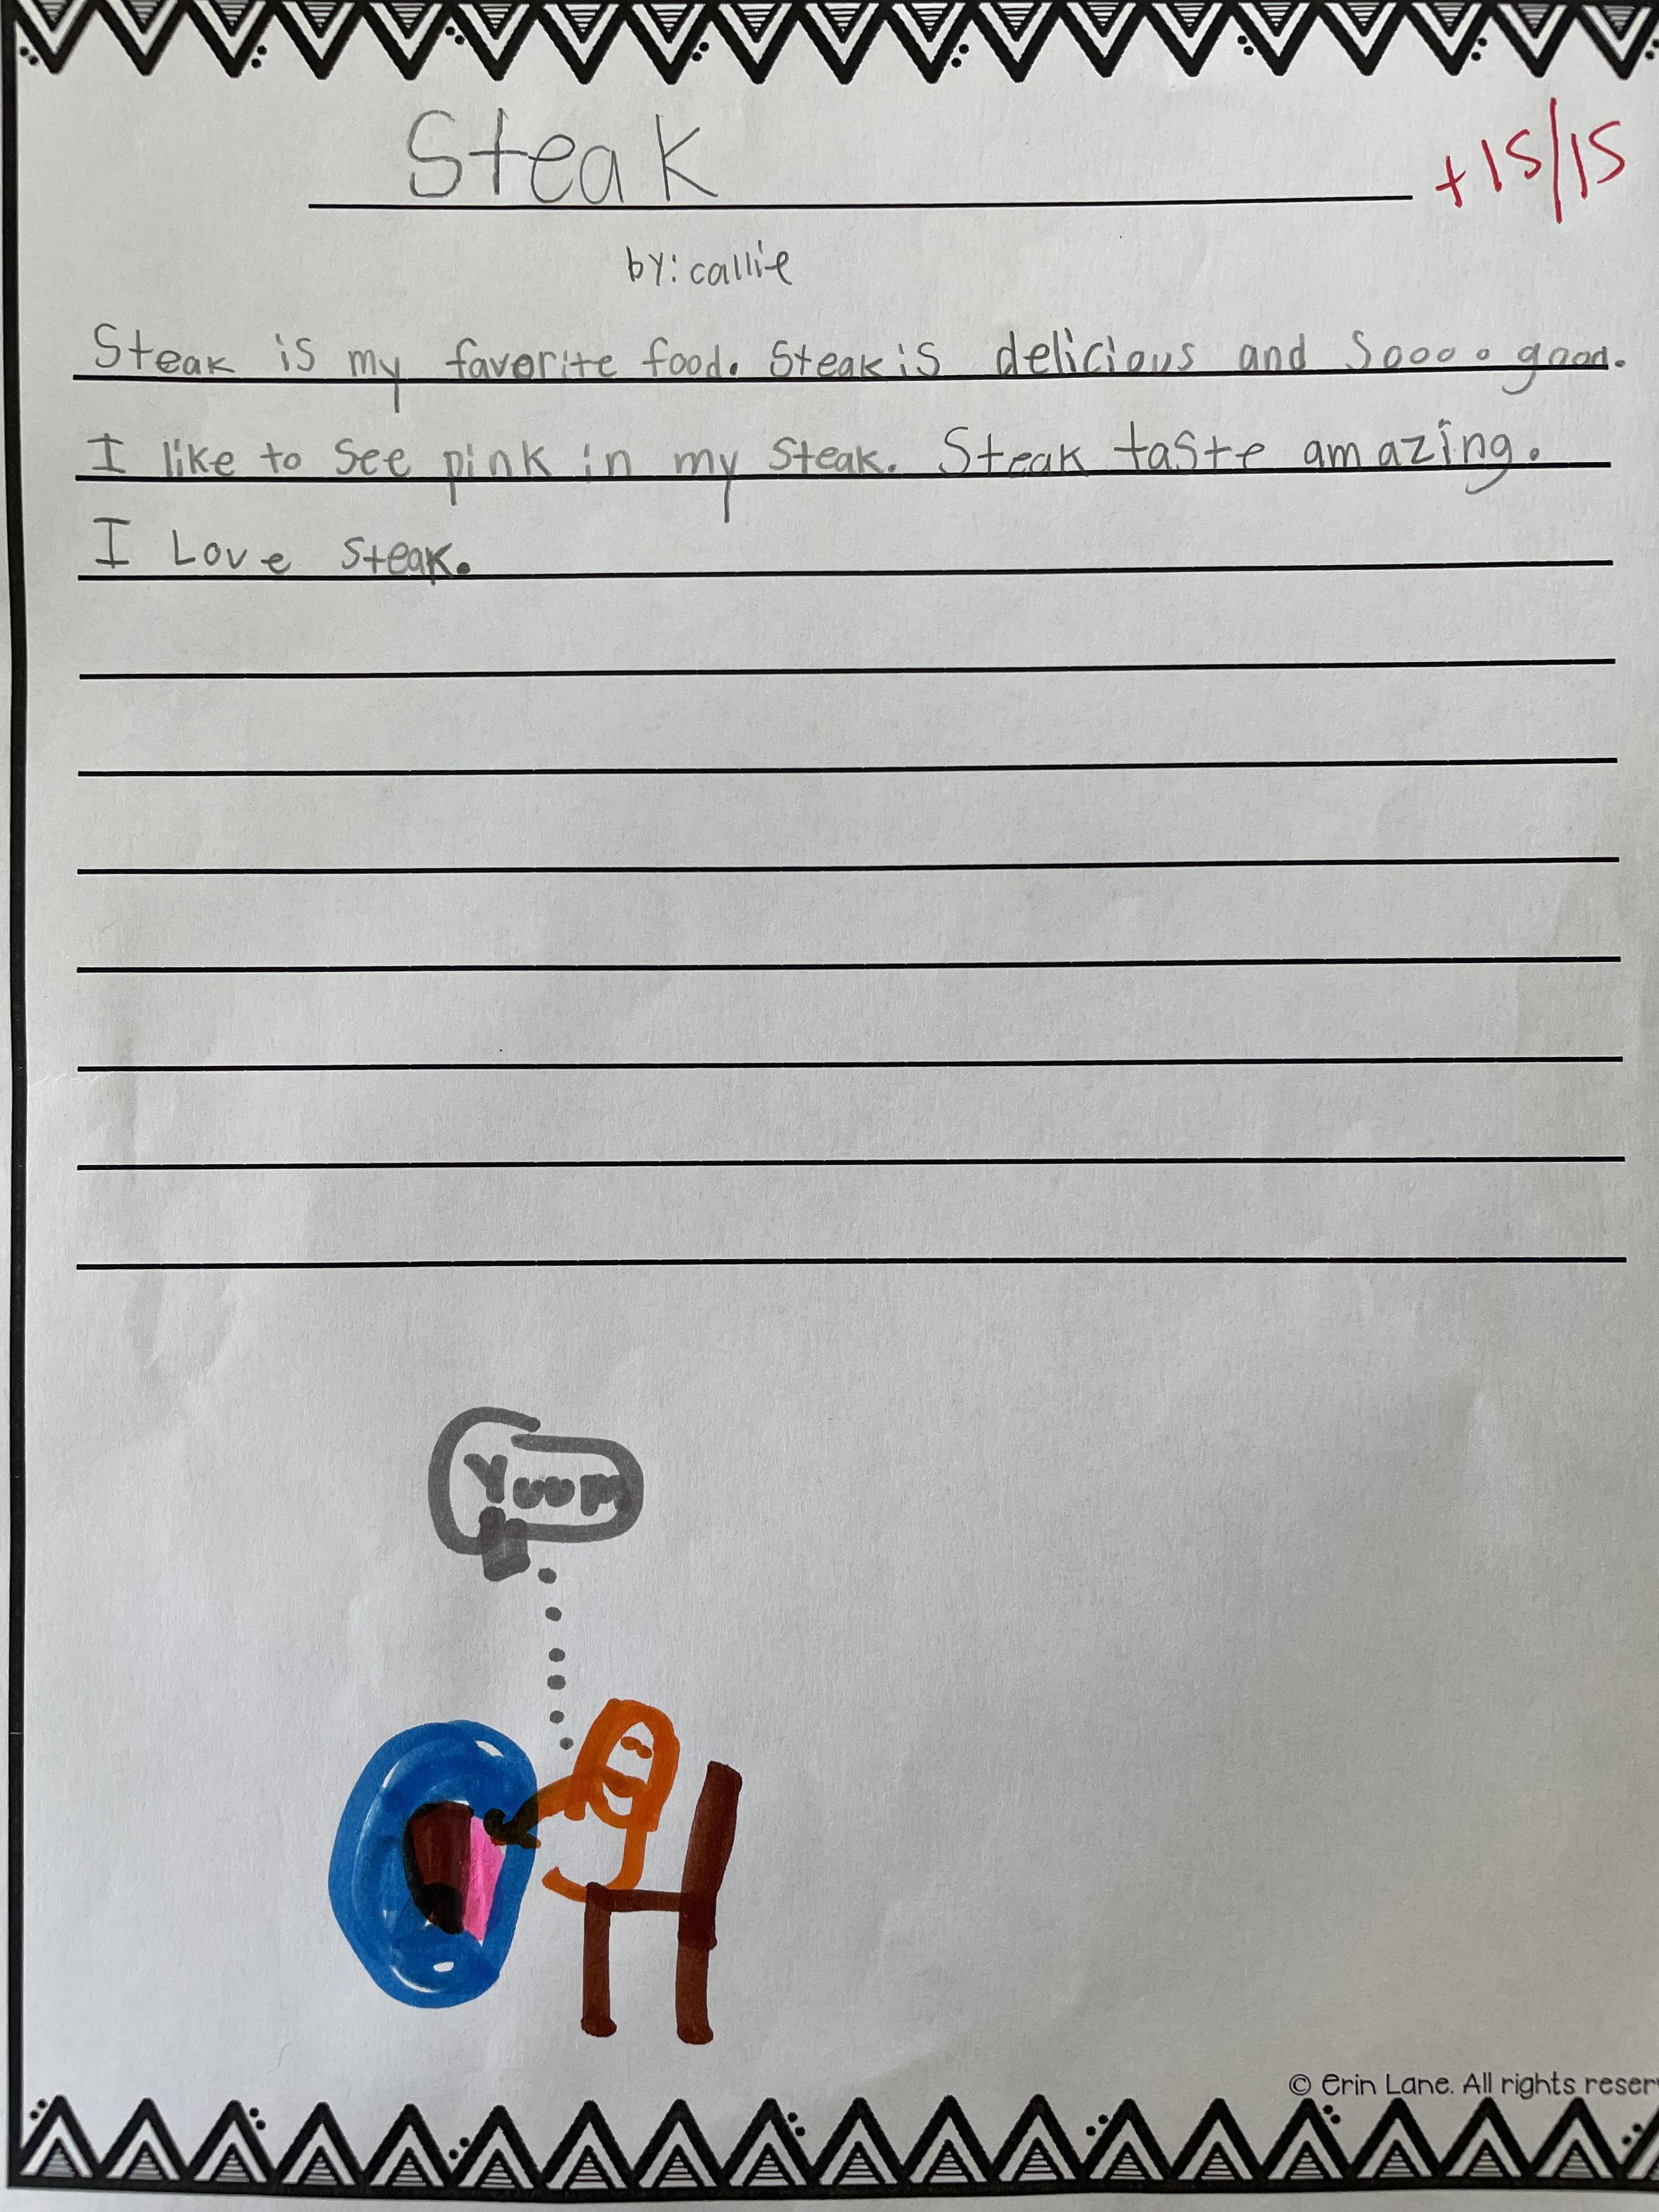 Daughter was told to write about something she likes.